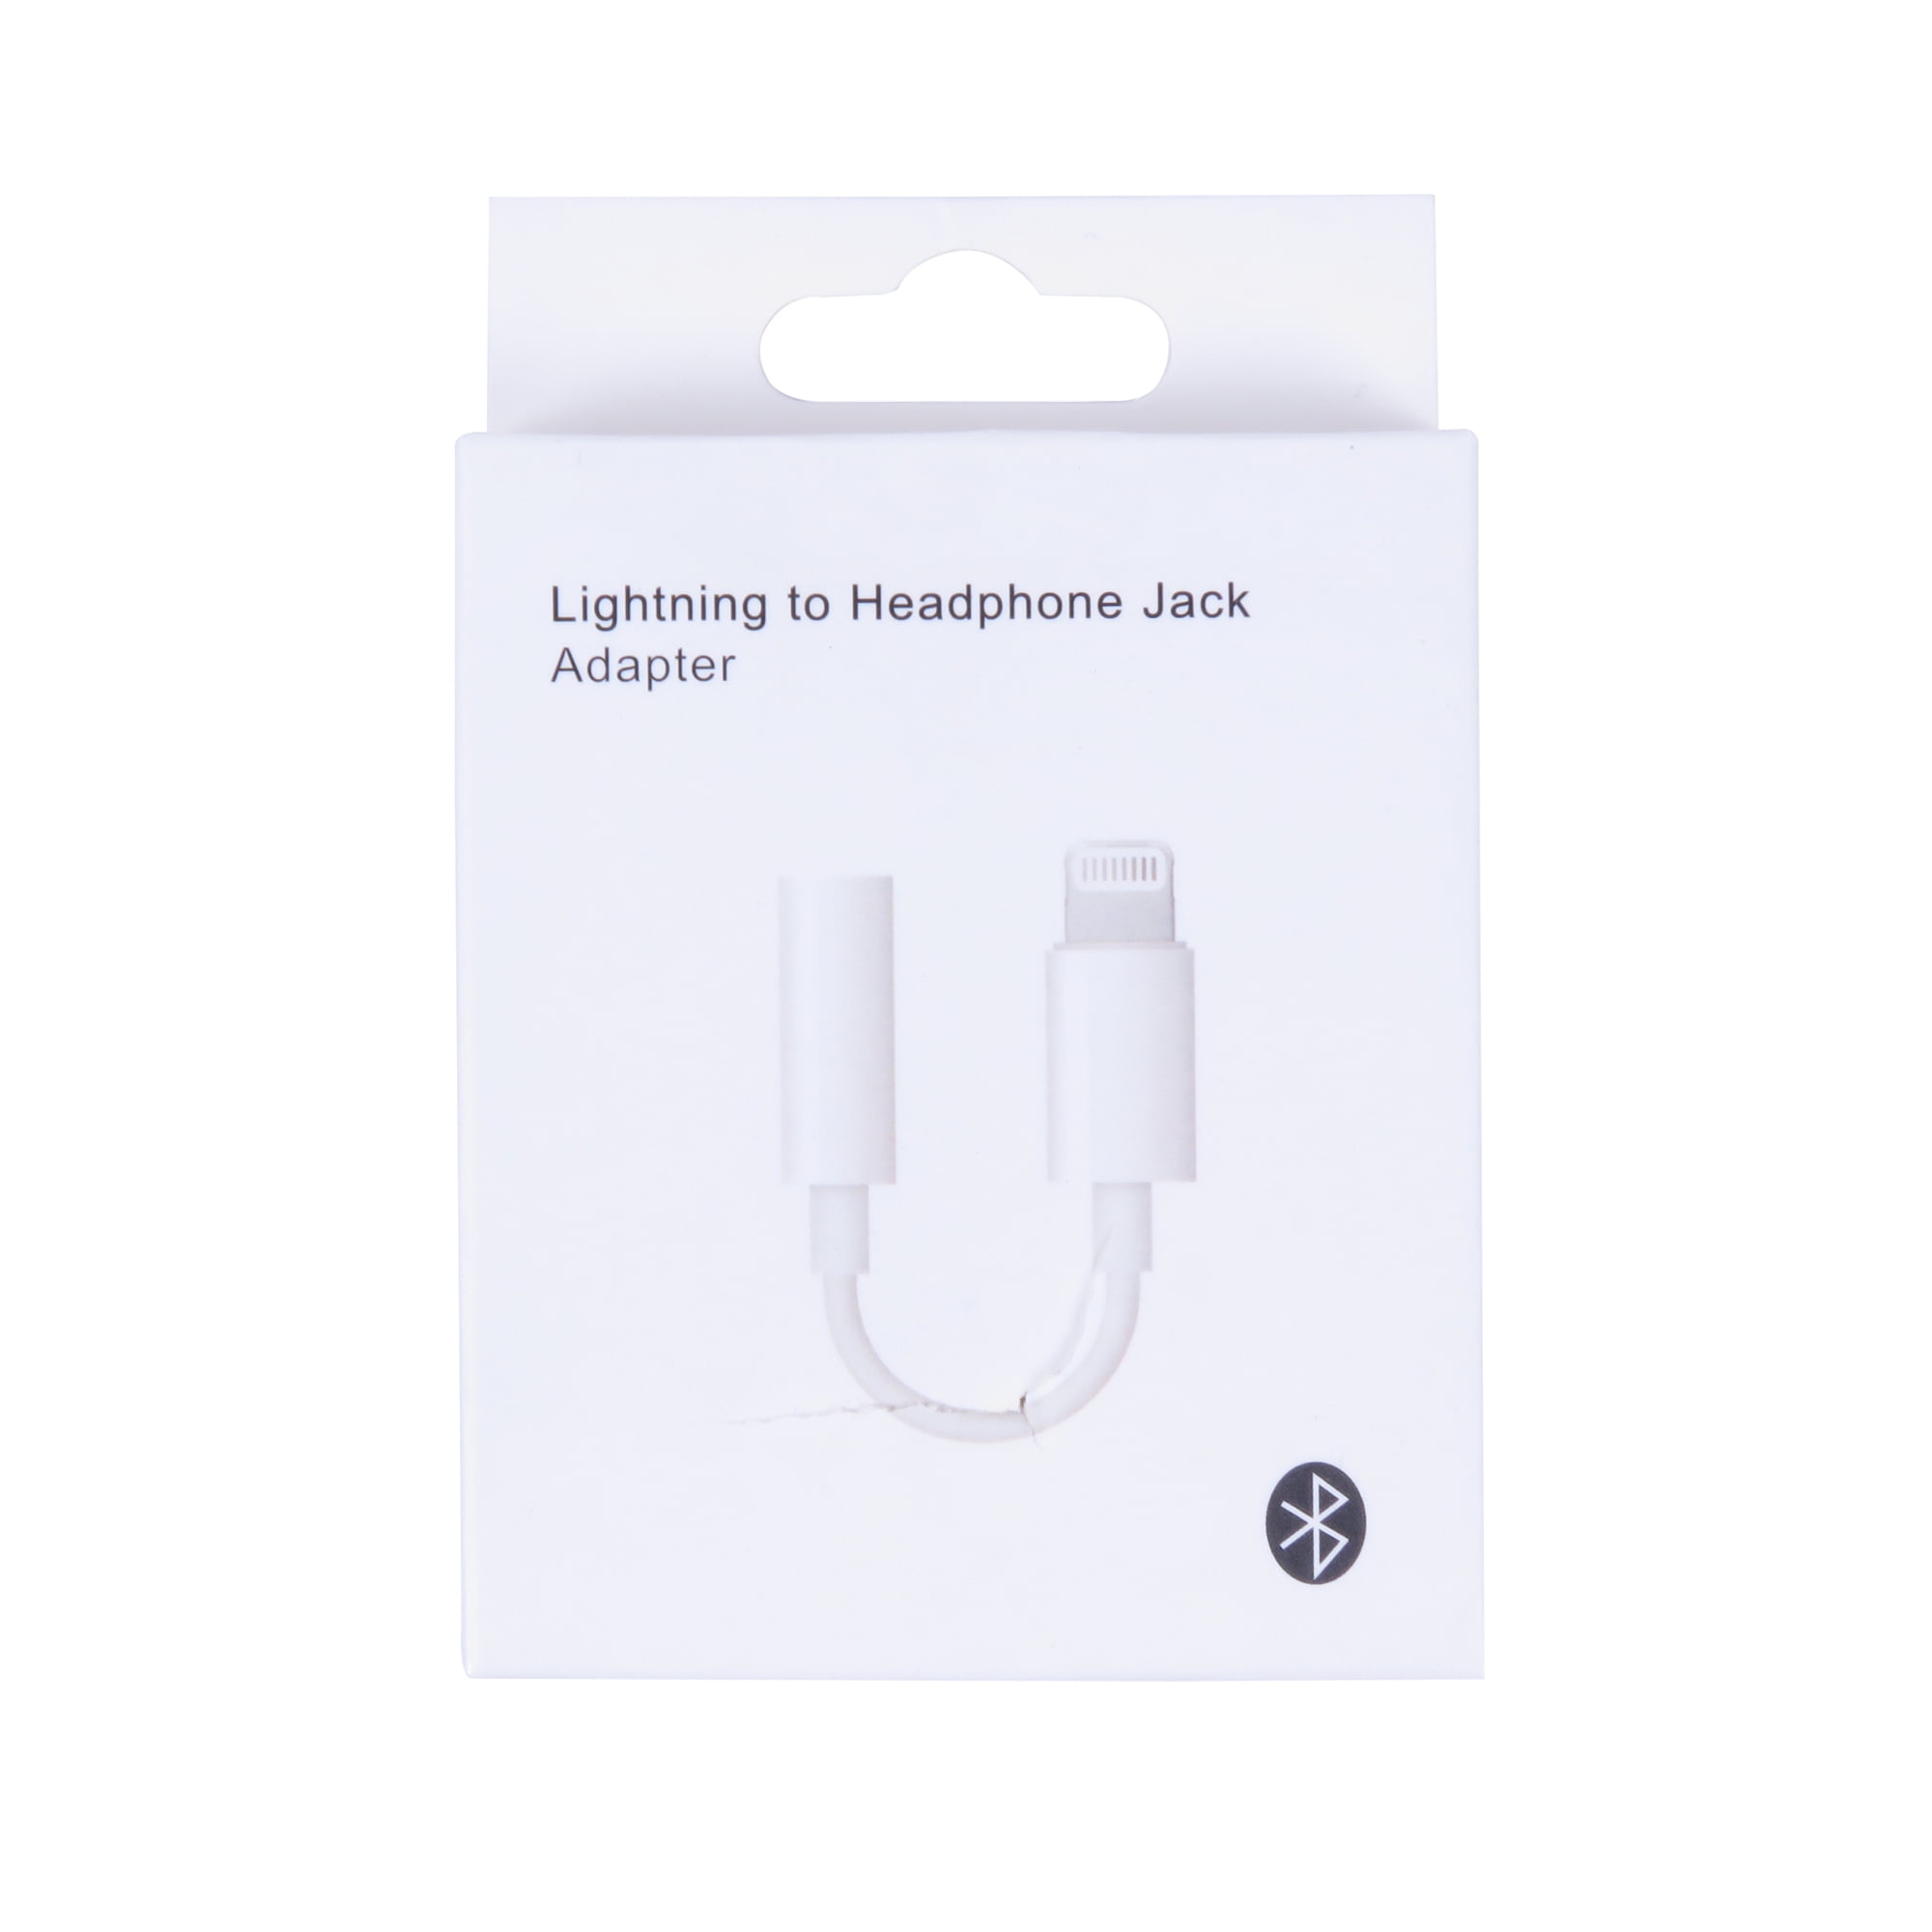 Audio Headphone Jack Adapter Lightning with  mm Headphone Cable  Connecter for iPhone 